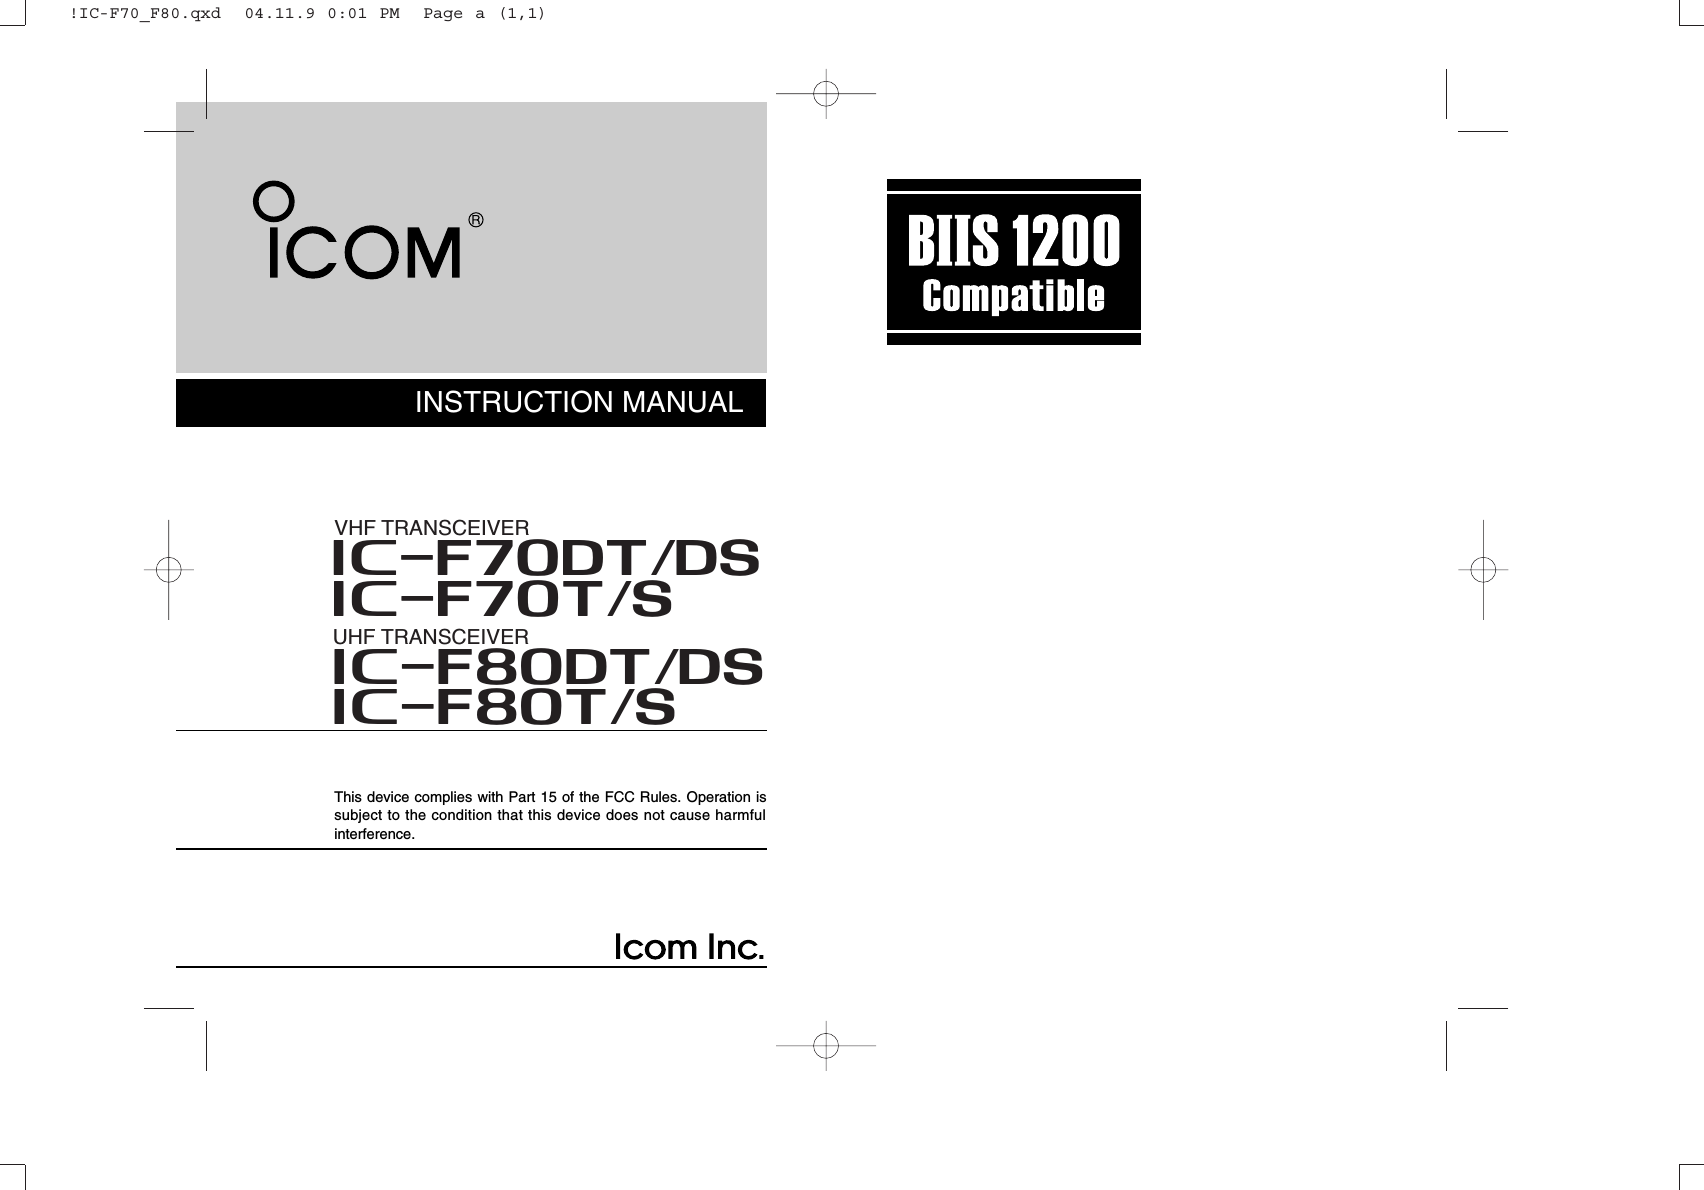 INSTRUCTION MANUALThis device complies with Part 15 of the FCC Rules. Operation issubject to the condition that this device does not cause harmfulinterference.iF70DT/DSVHF TRANSCEIVERiF70T/SiF80DT/DSUHF TRANSCEIVERiF80T/S!IC-F70_F80.qxd  04.11.9 0:01 PM  Page a (1,1)